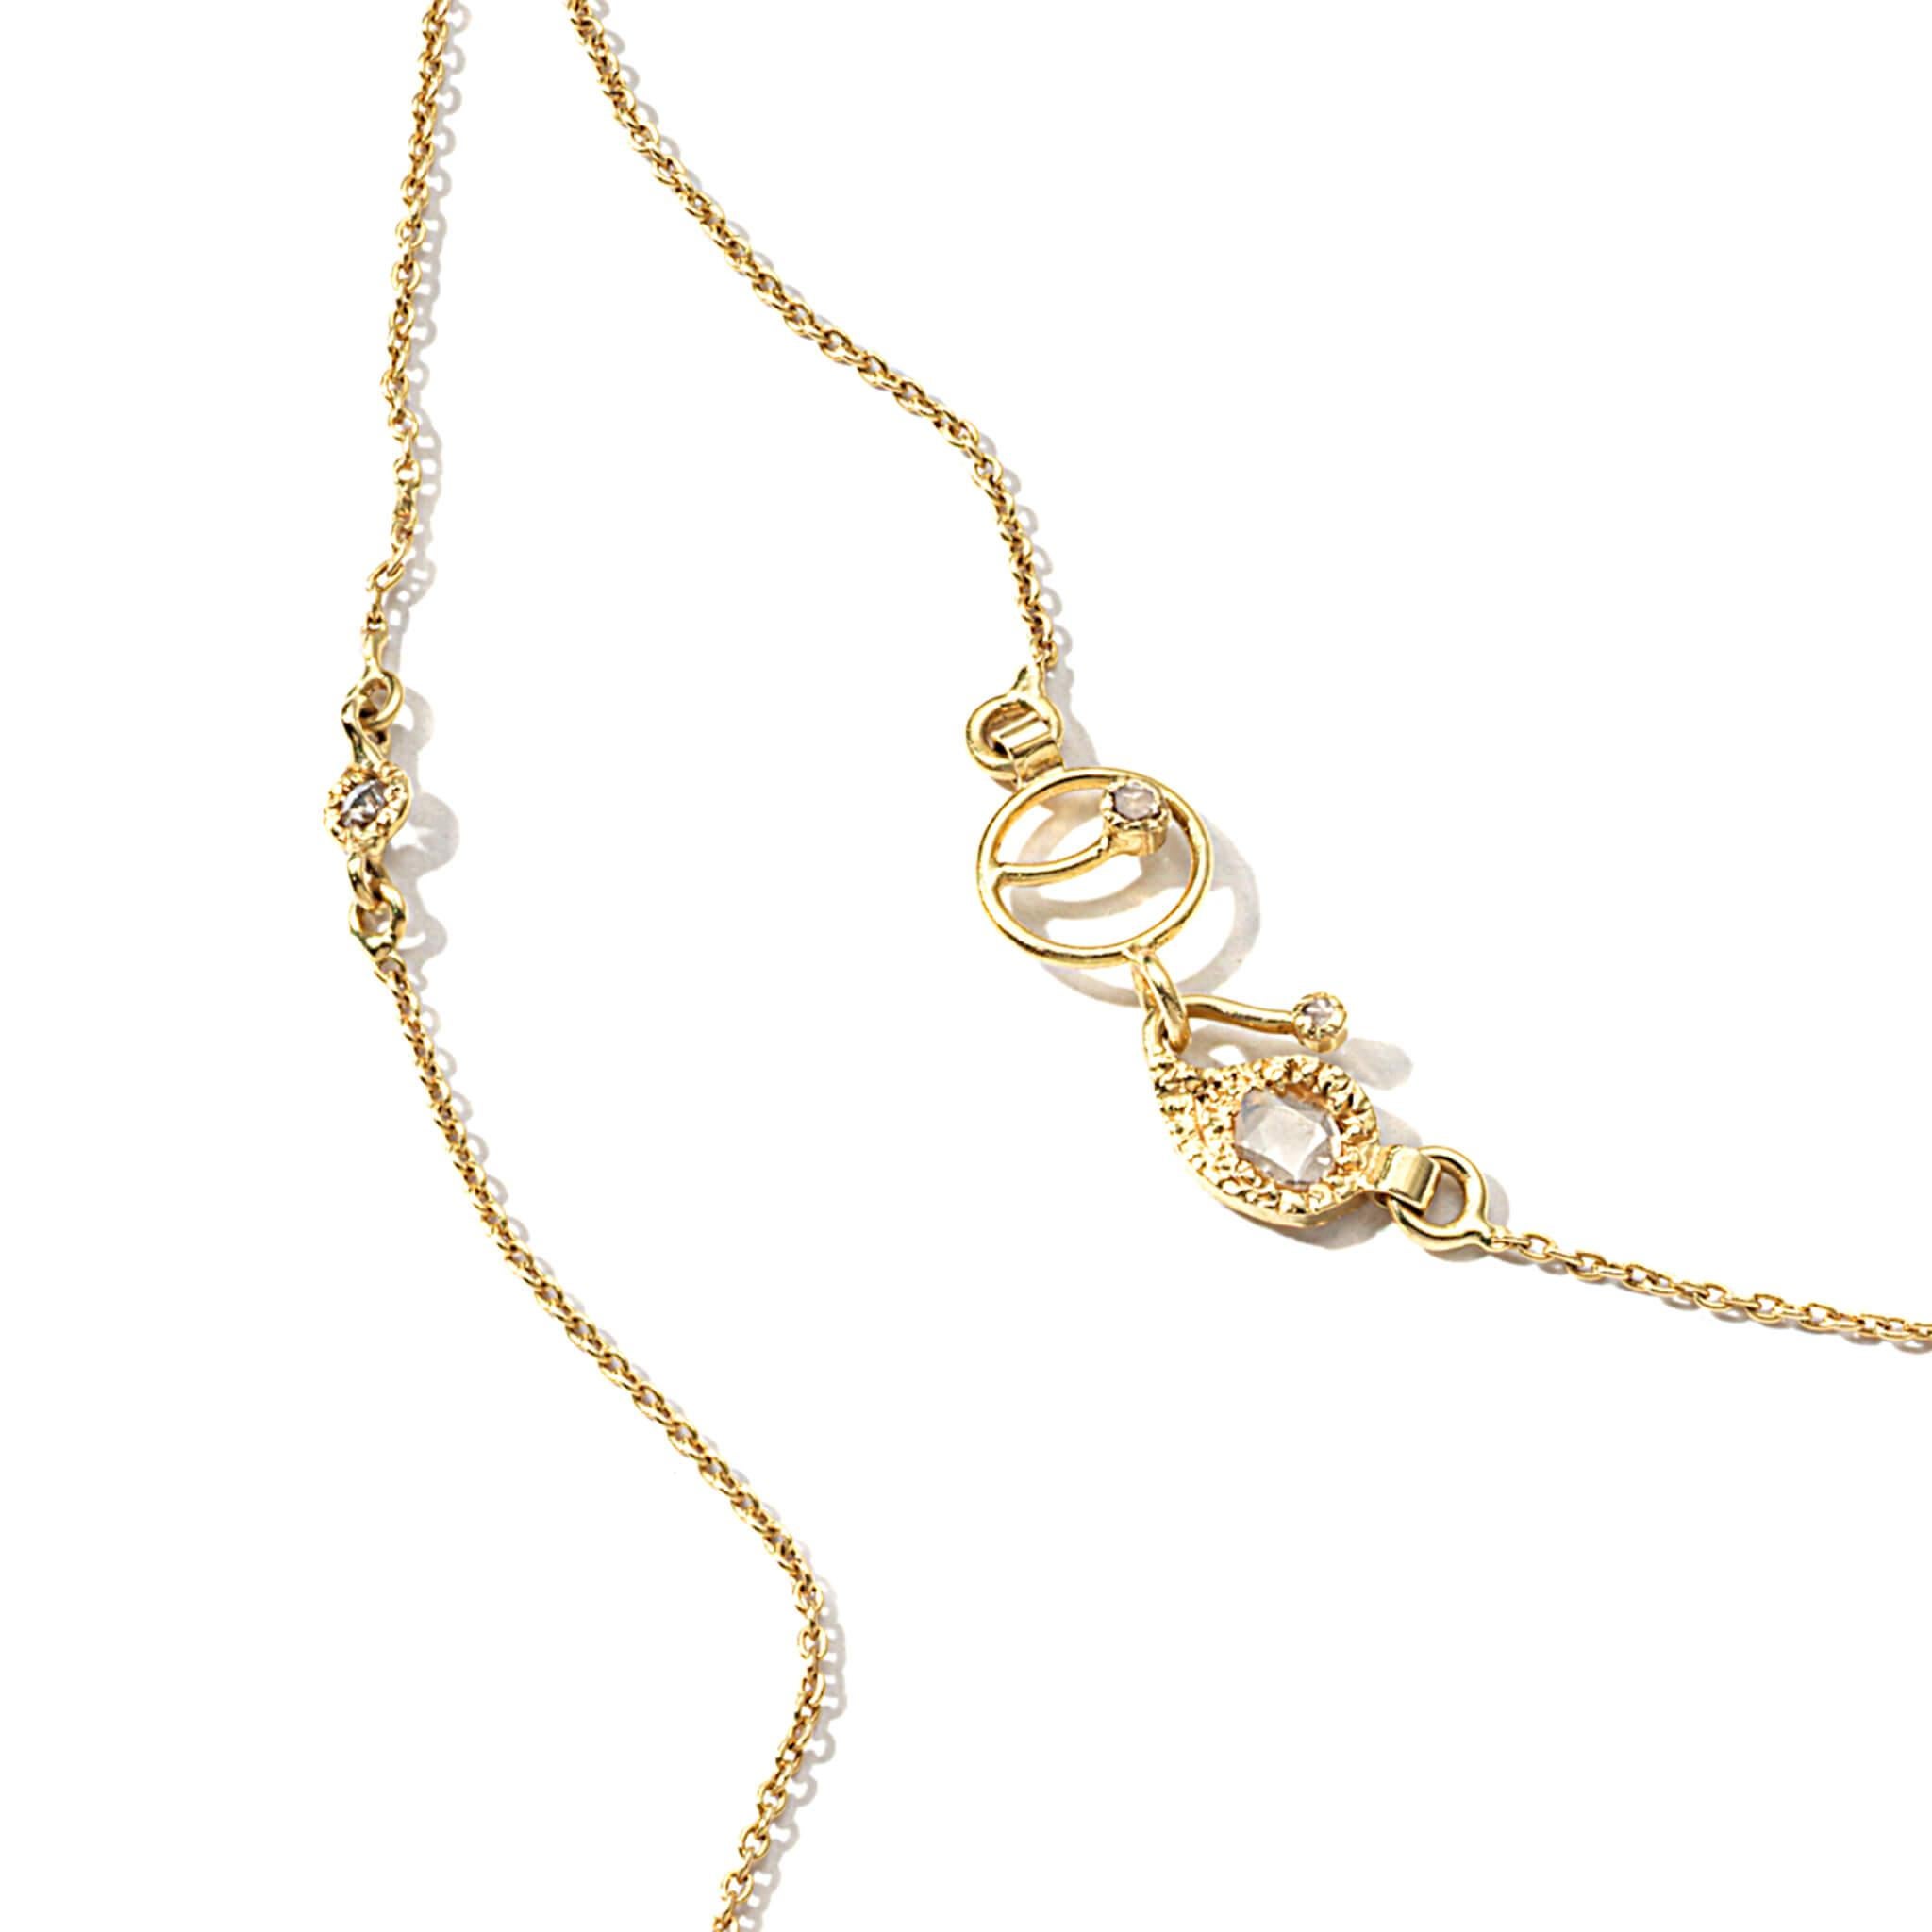 Chain necklace set in 20K yellow gold with 0.52cts diamond stations and paisley clasp detail, length measures 24 inches.
